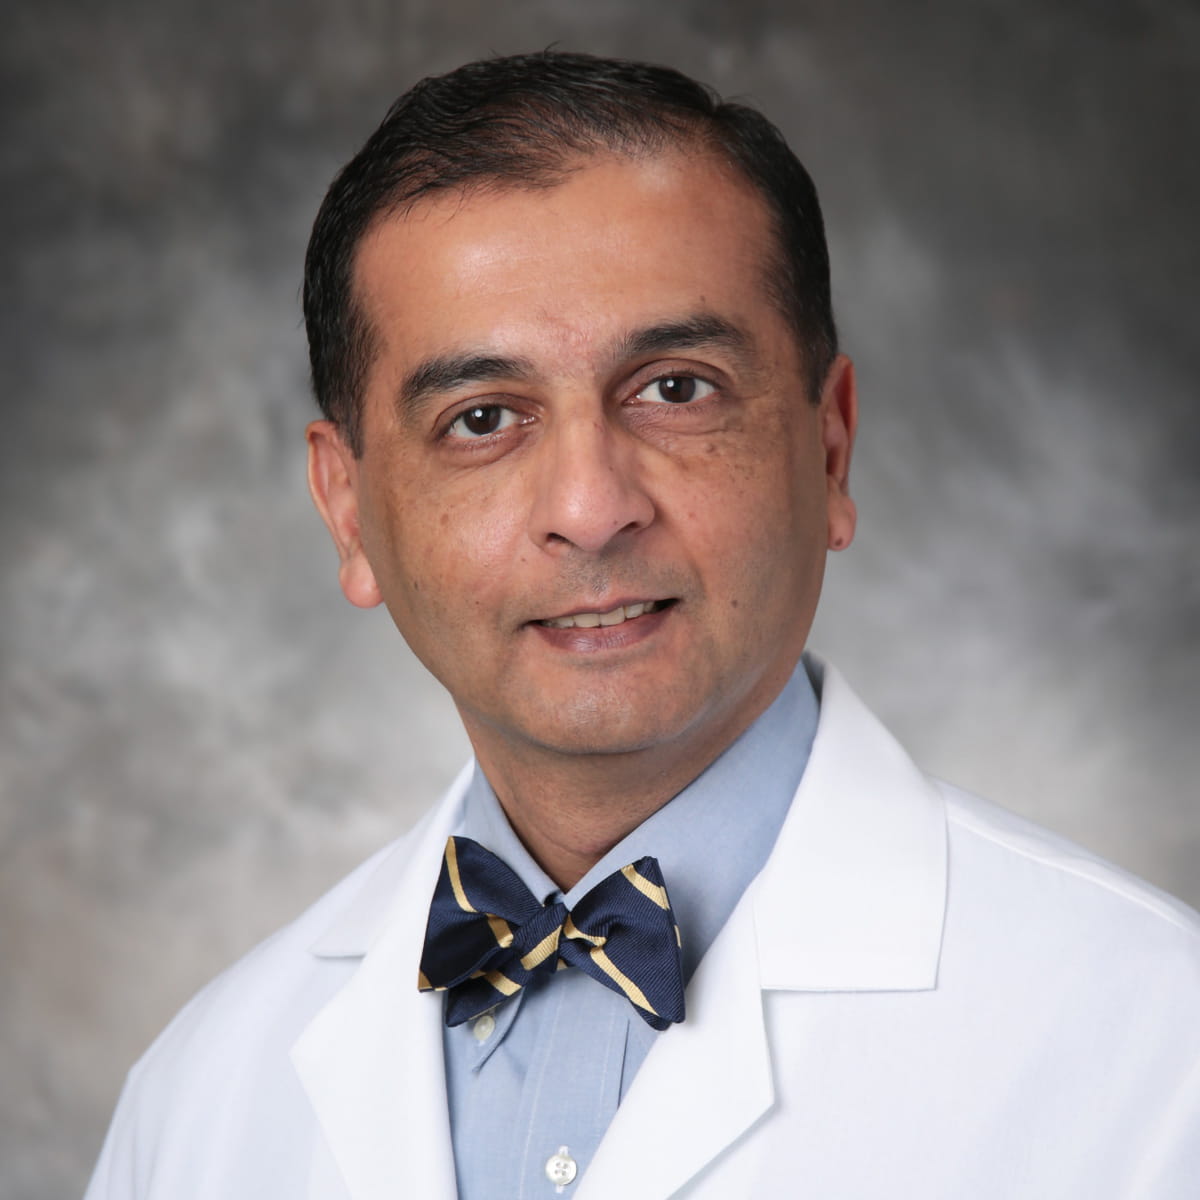 A friendly headshot of Absar Mirza, MD